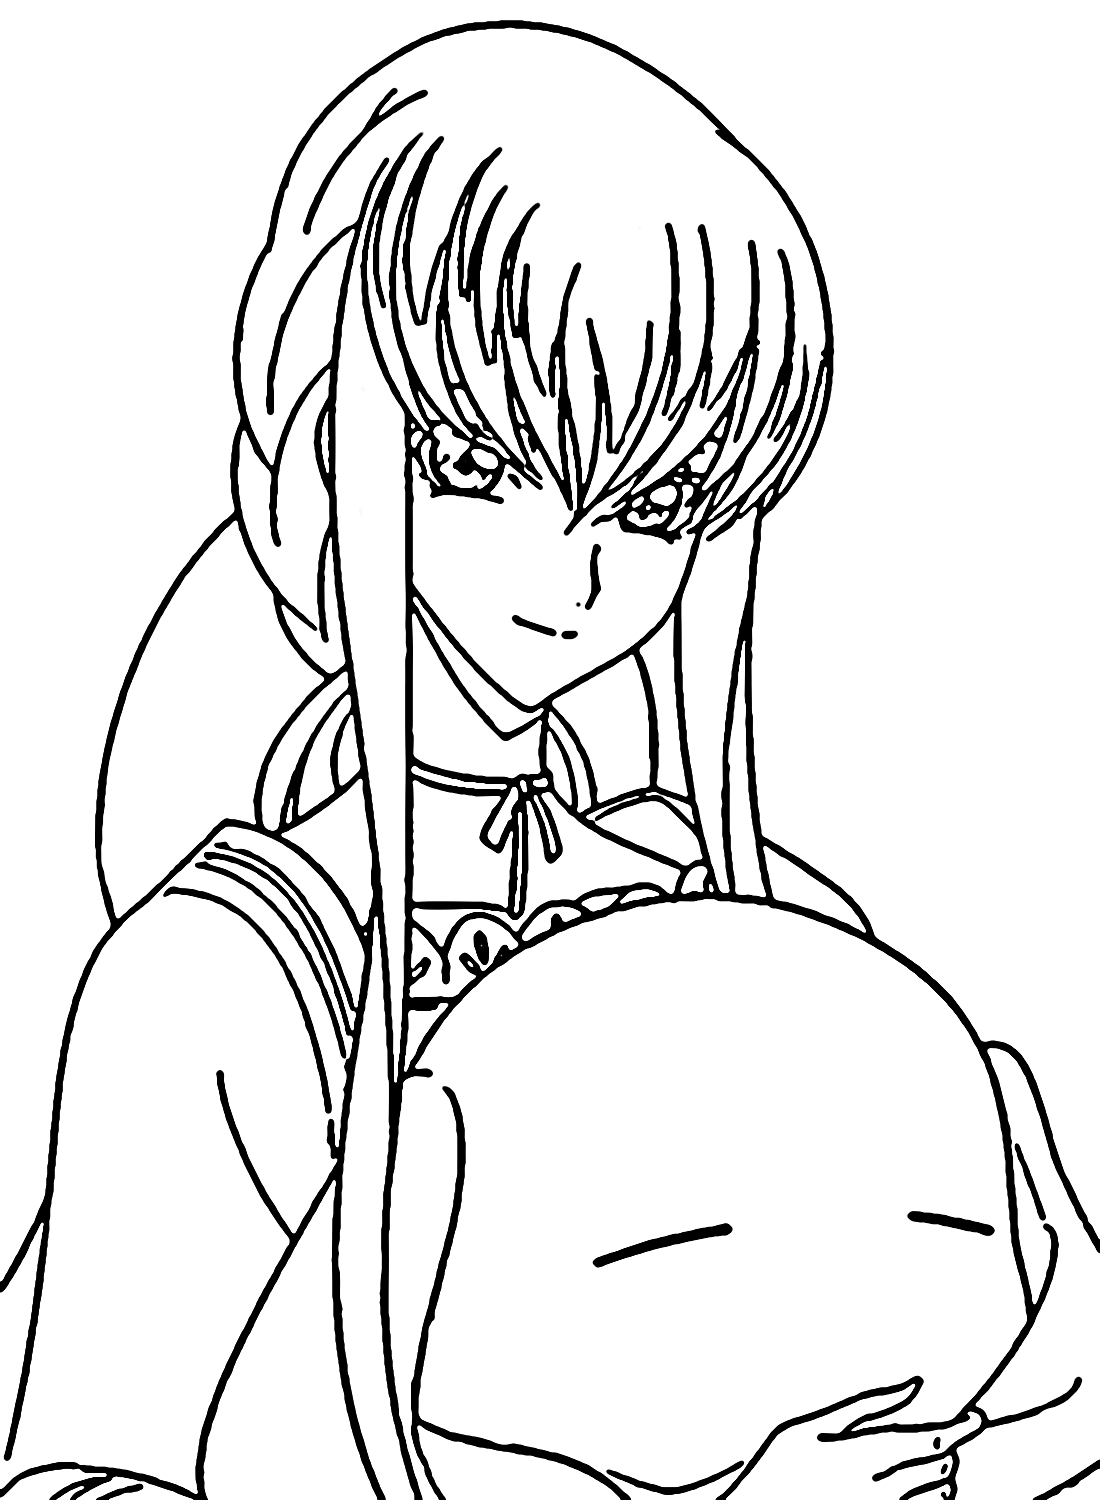 C.C. Anime Coloring Pages from C.C. Code Geass